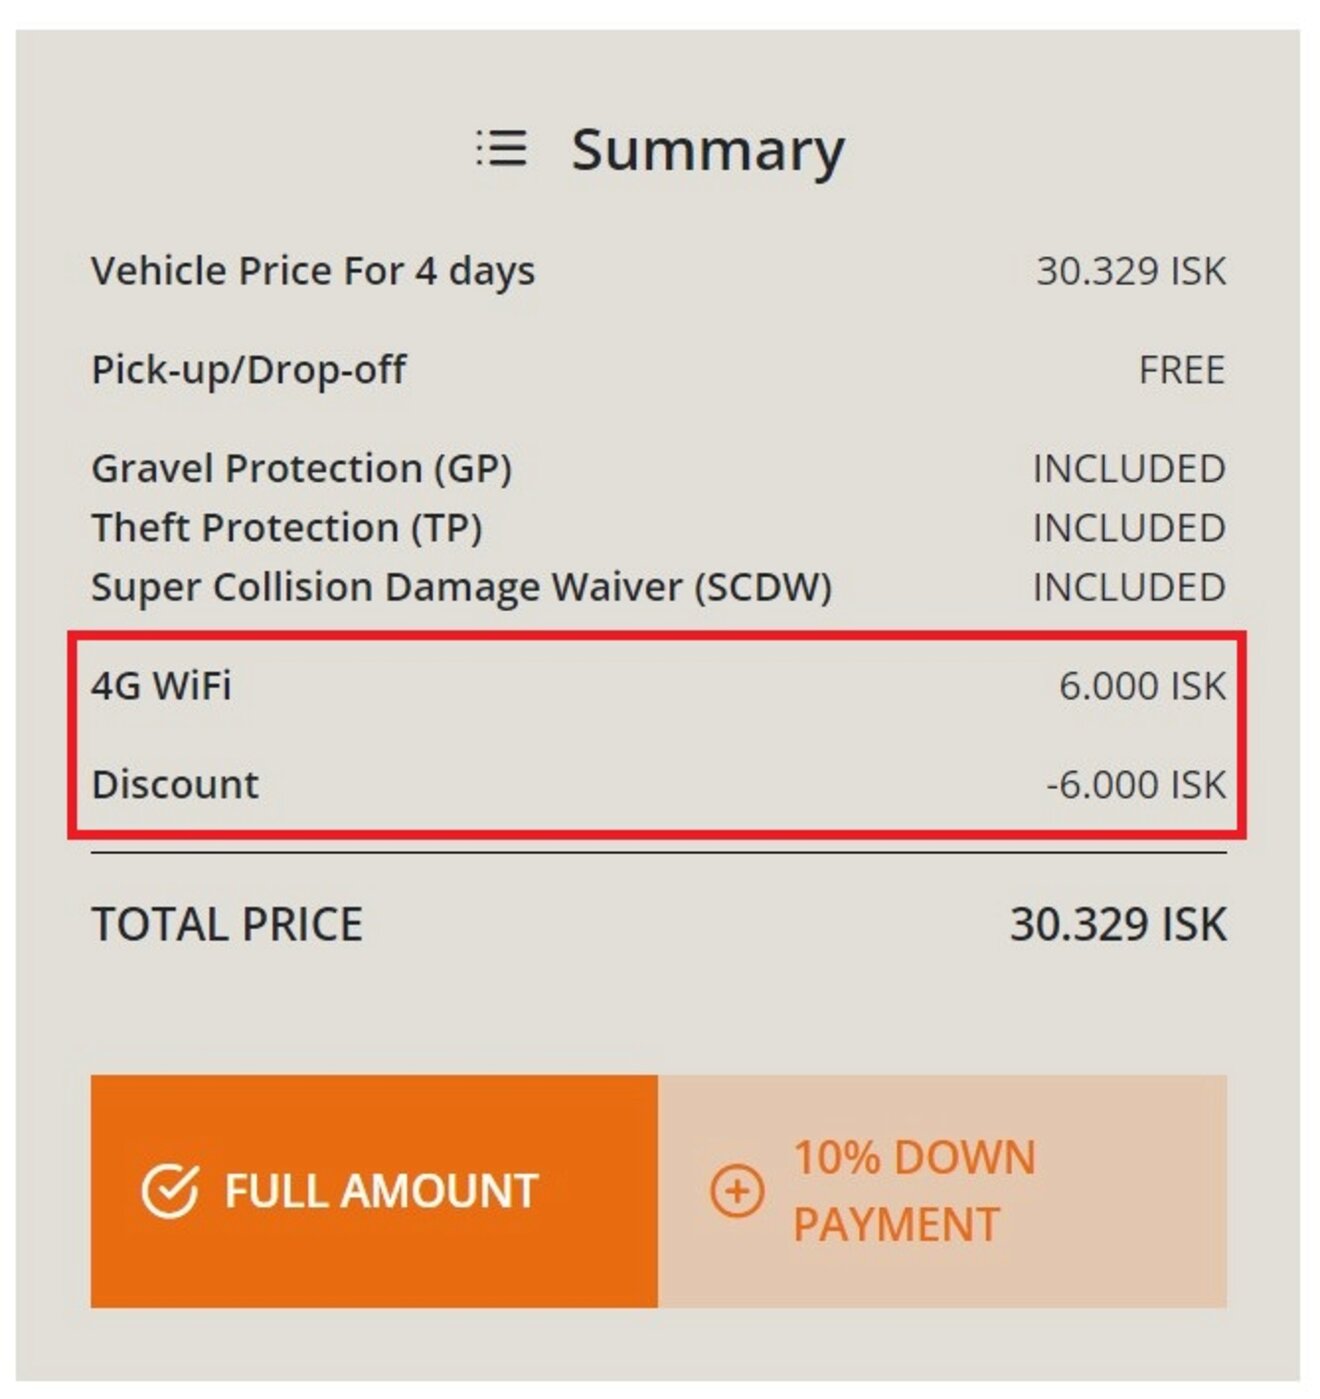 A summary breakdown of rental costs for a vehicle from Lava Rental Car, listing the vehicle price for 2 days, various included insurances, a 4G WiFi charge, and a discount